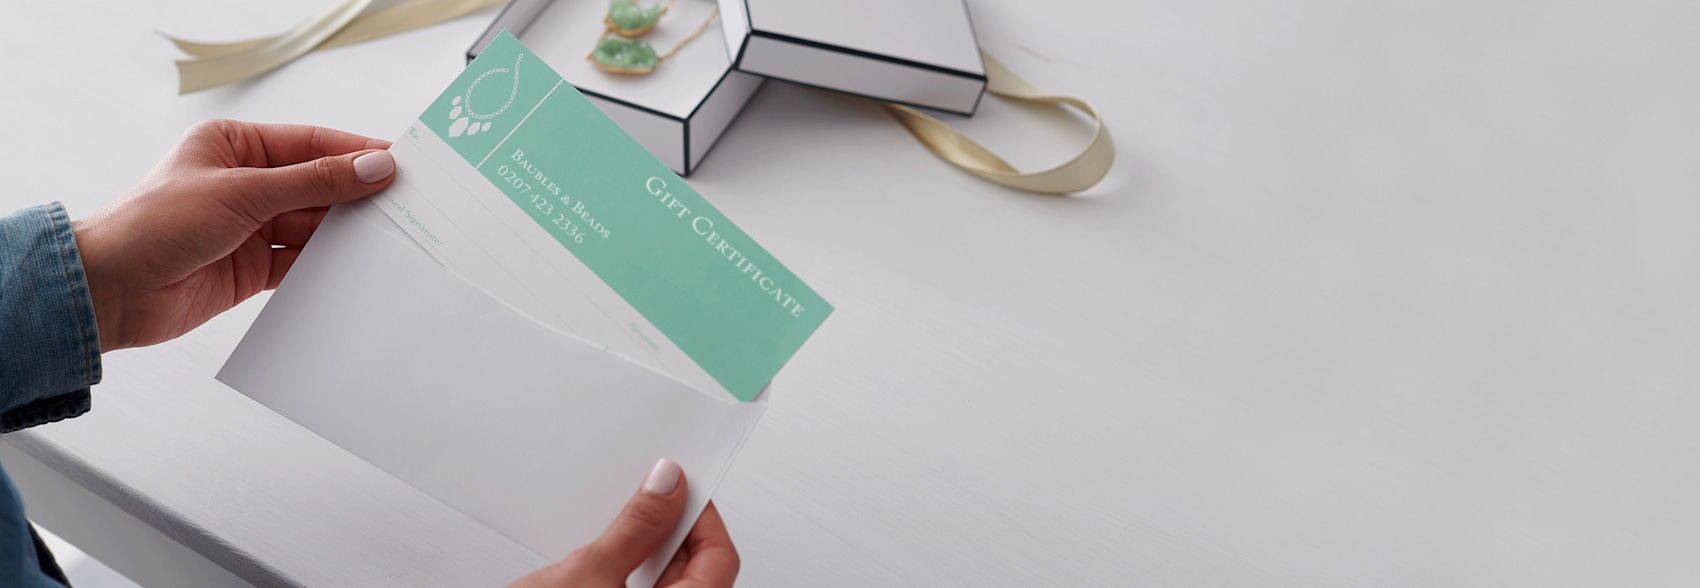 personalised gift voucher with mint colour scheme